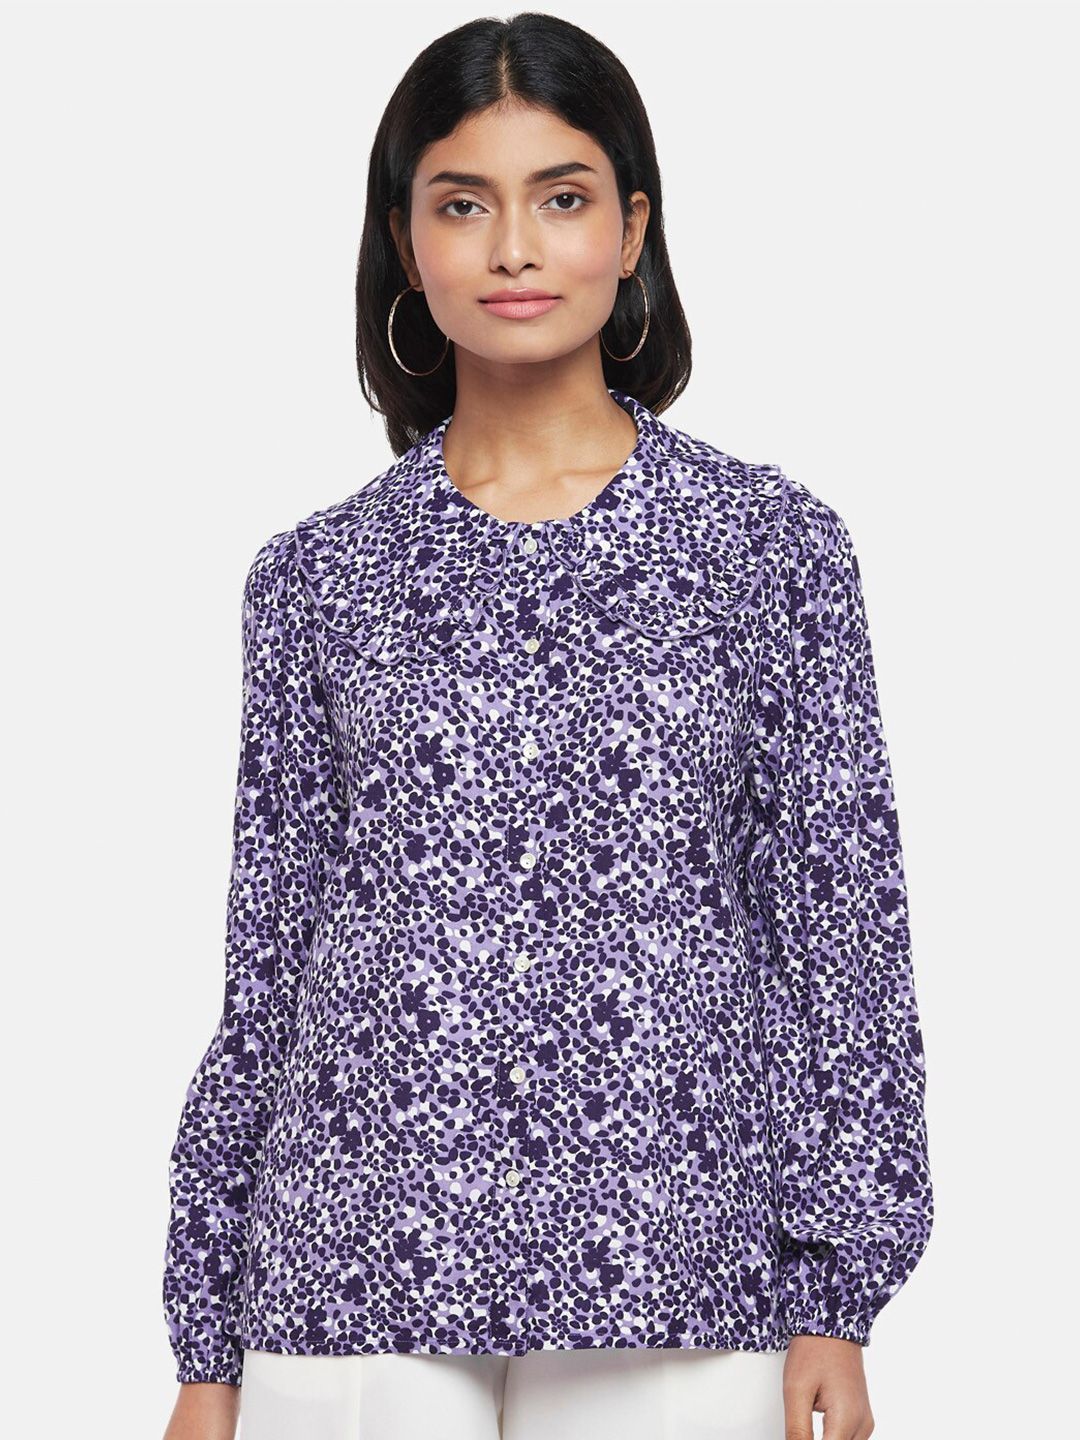 Honey by Pantaloons Women Purple Floral Print Top Price in India